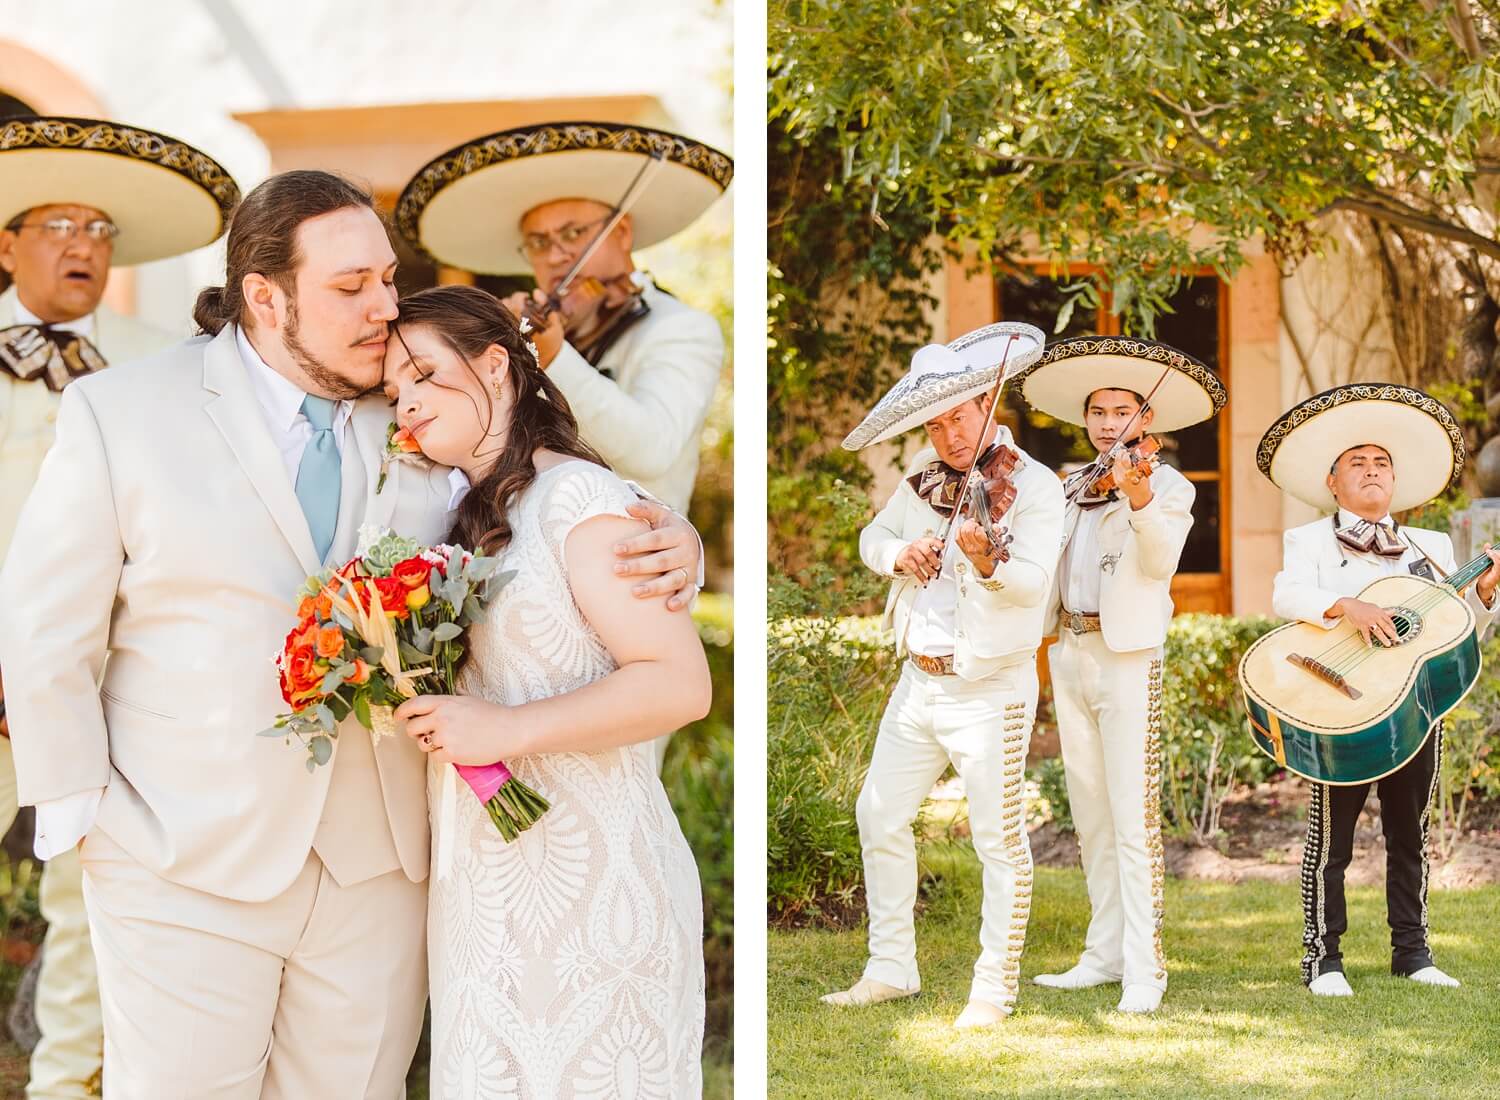 Bride and groom standing in front of mariachi band at Mexico destination wedding | Brooke Michelle Photo